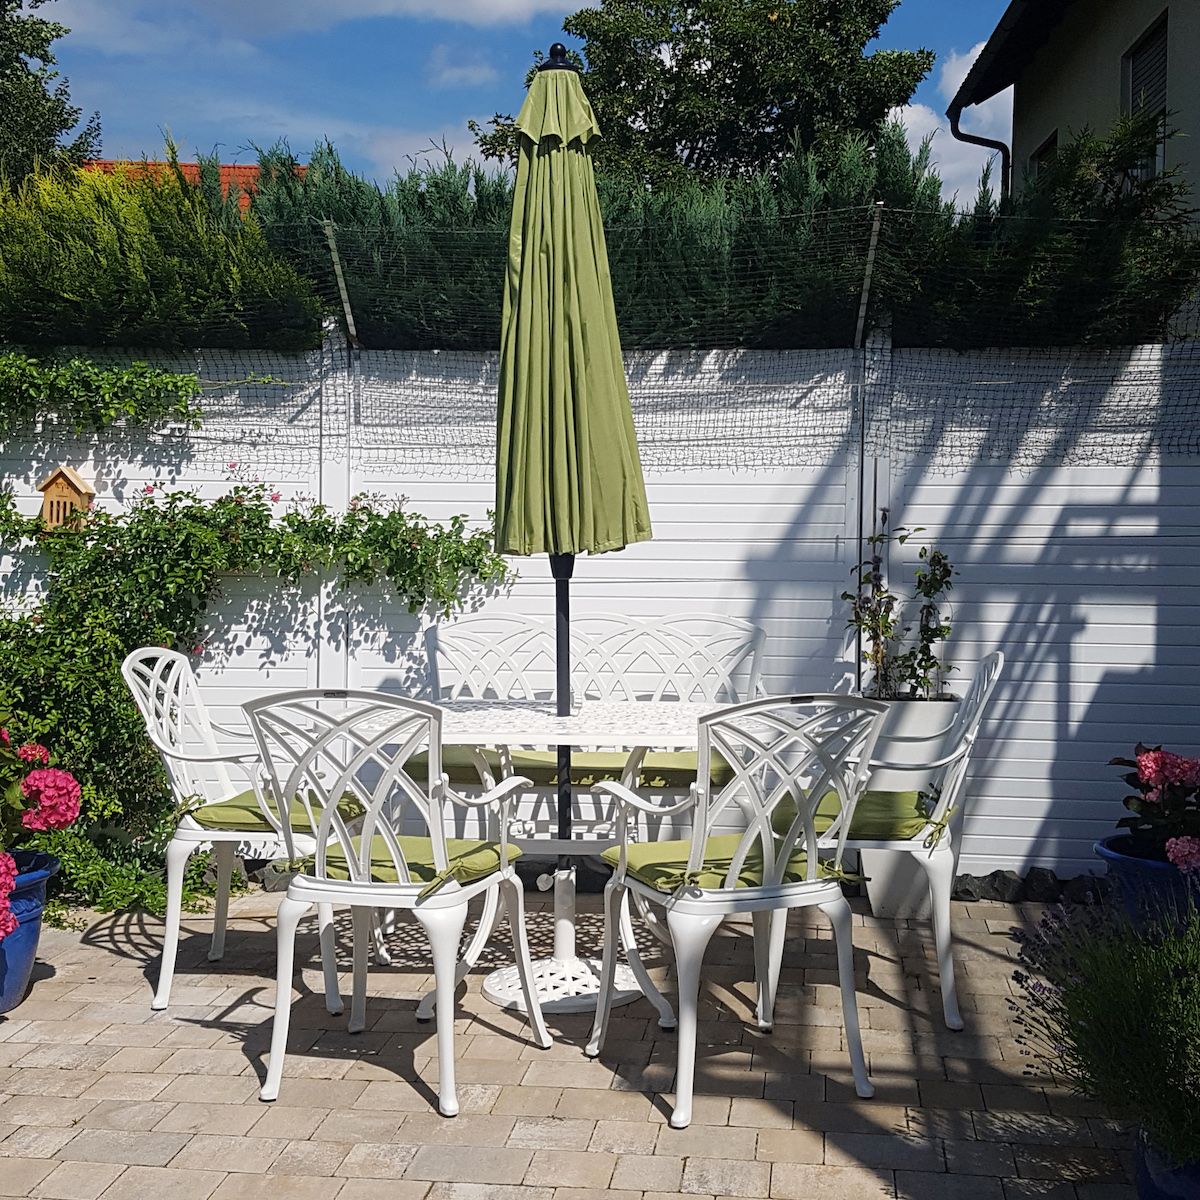 Protect our metal garden furniture from the sun